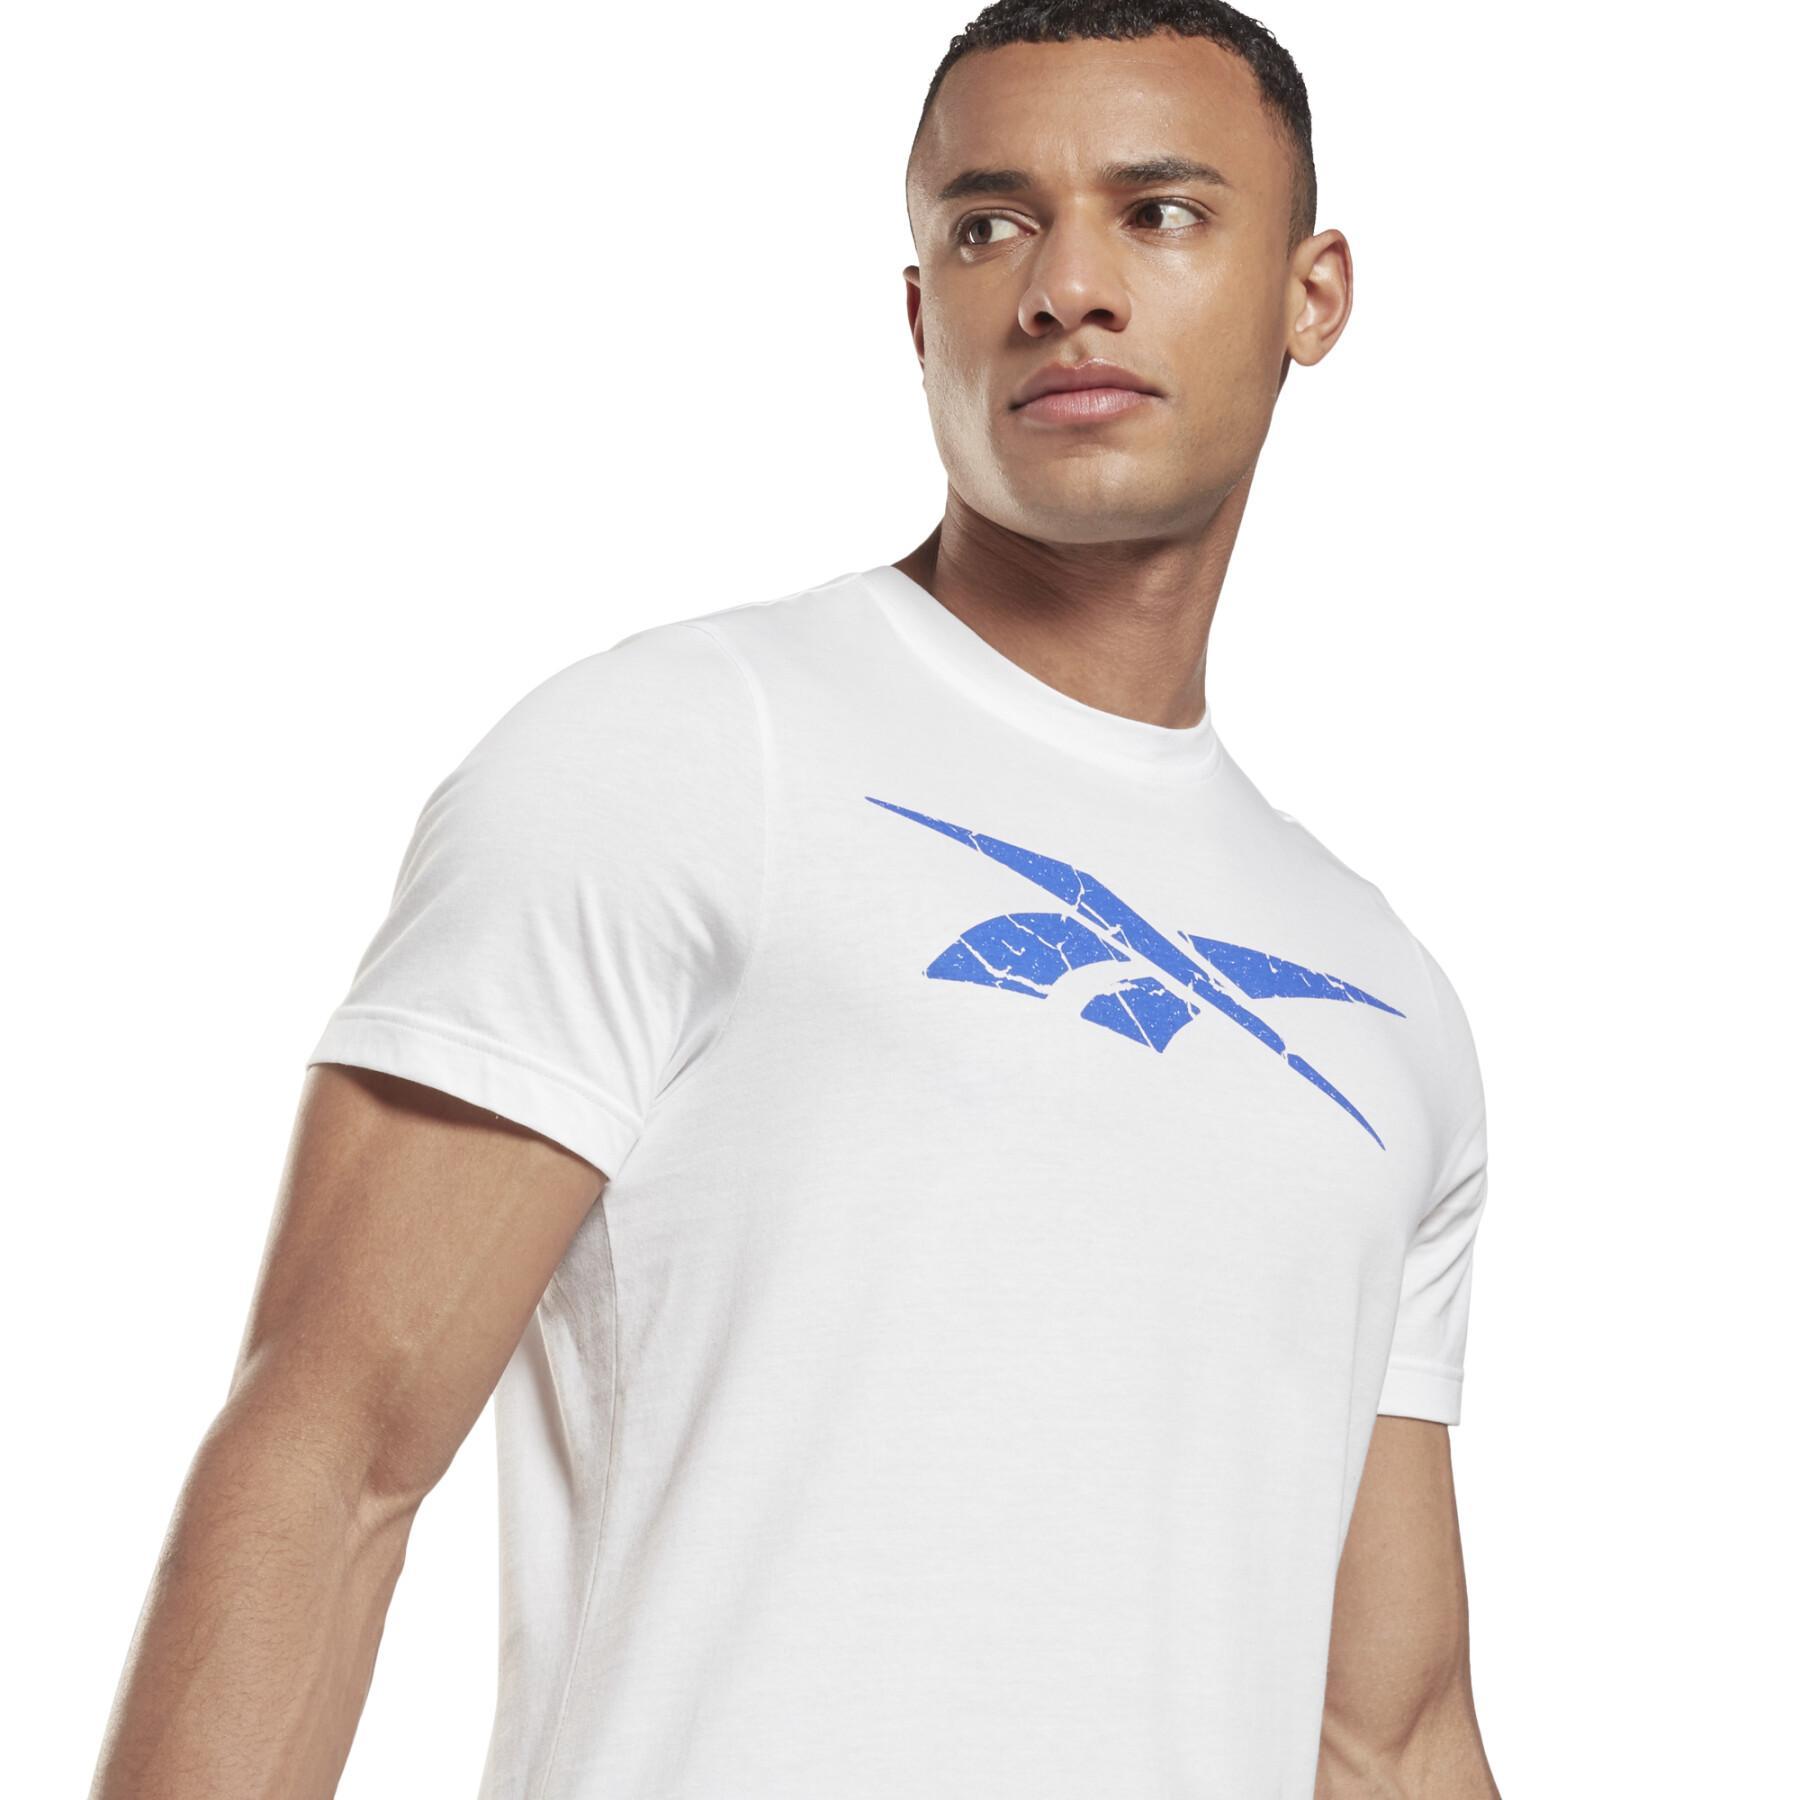 T-shirt Reebok Elevated Graphic